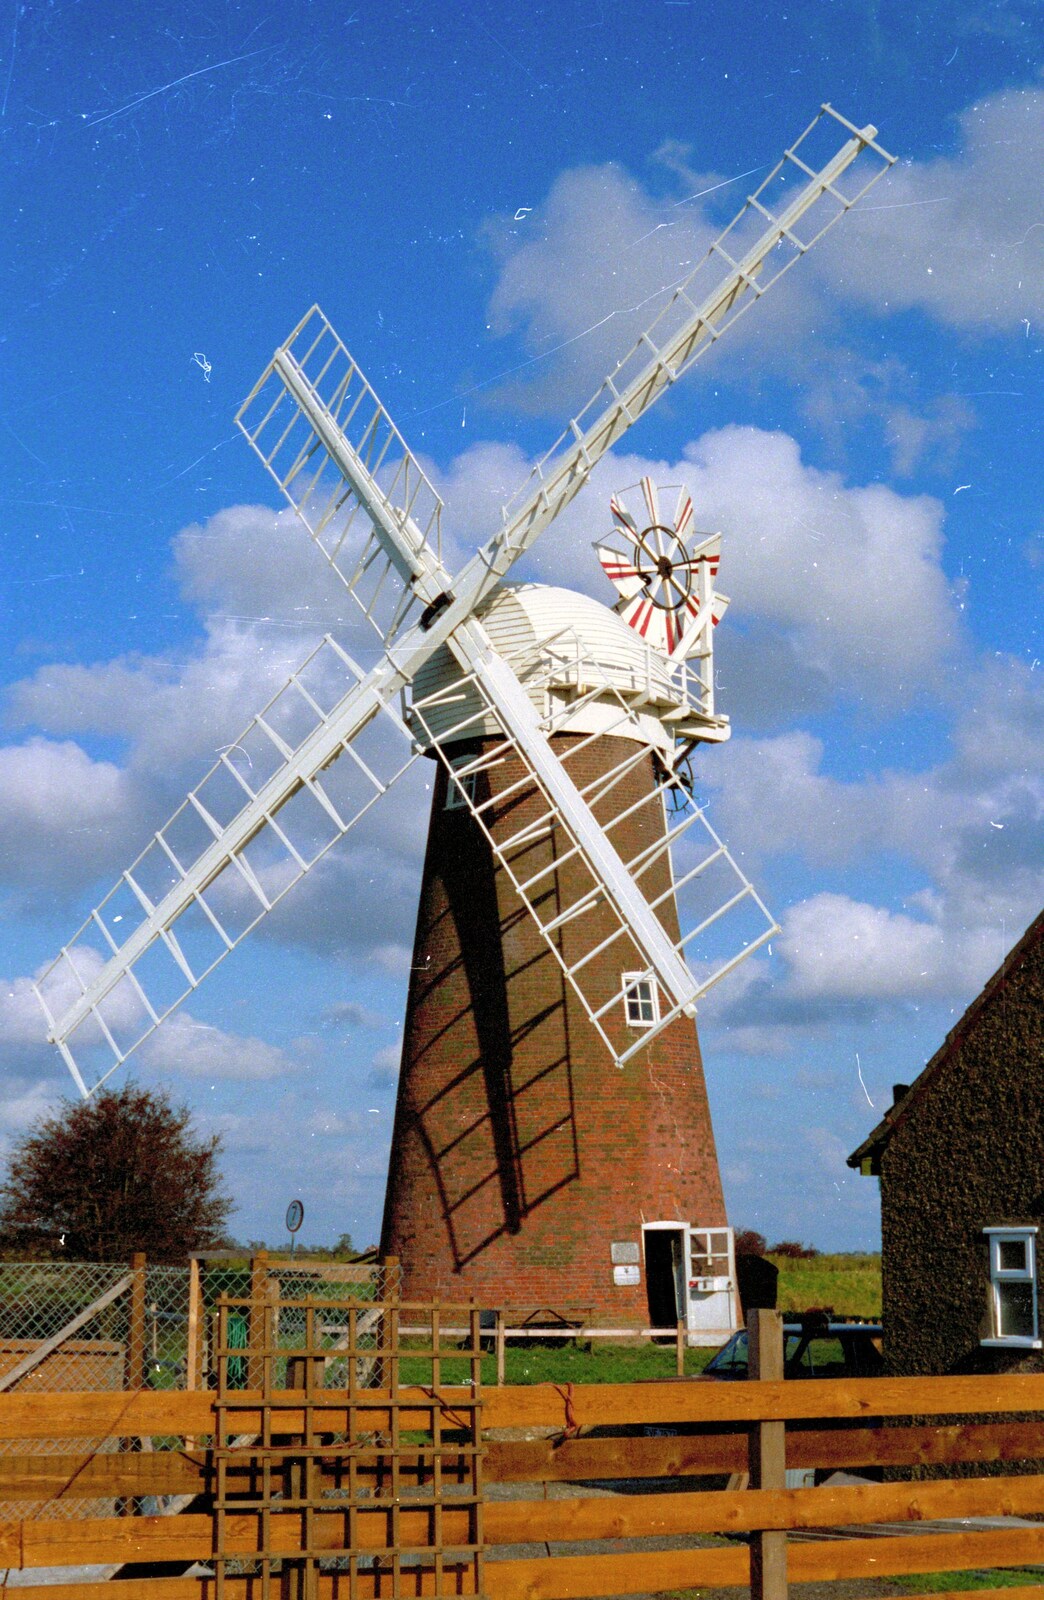 From Waterloo Station to Great Yarmouth, London and Norfolk - 20th September 1987: Stracey Arms Wind Pump